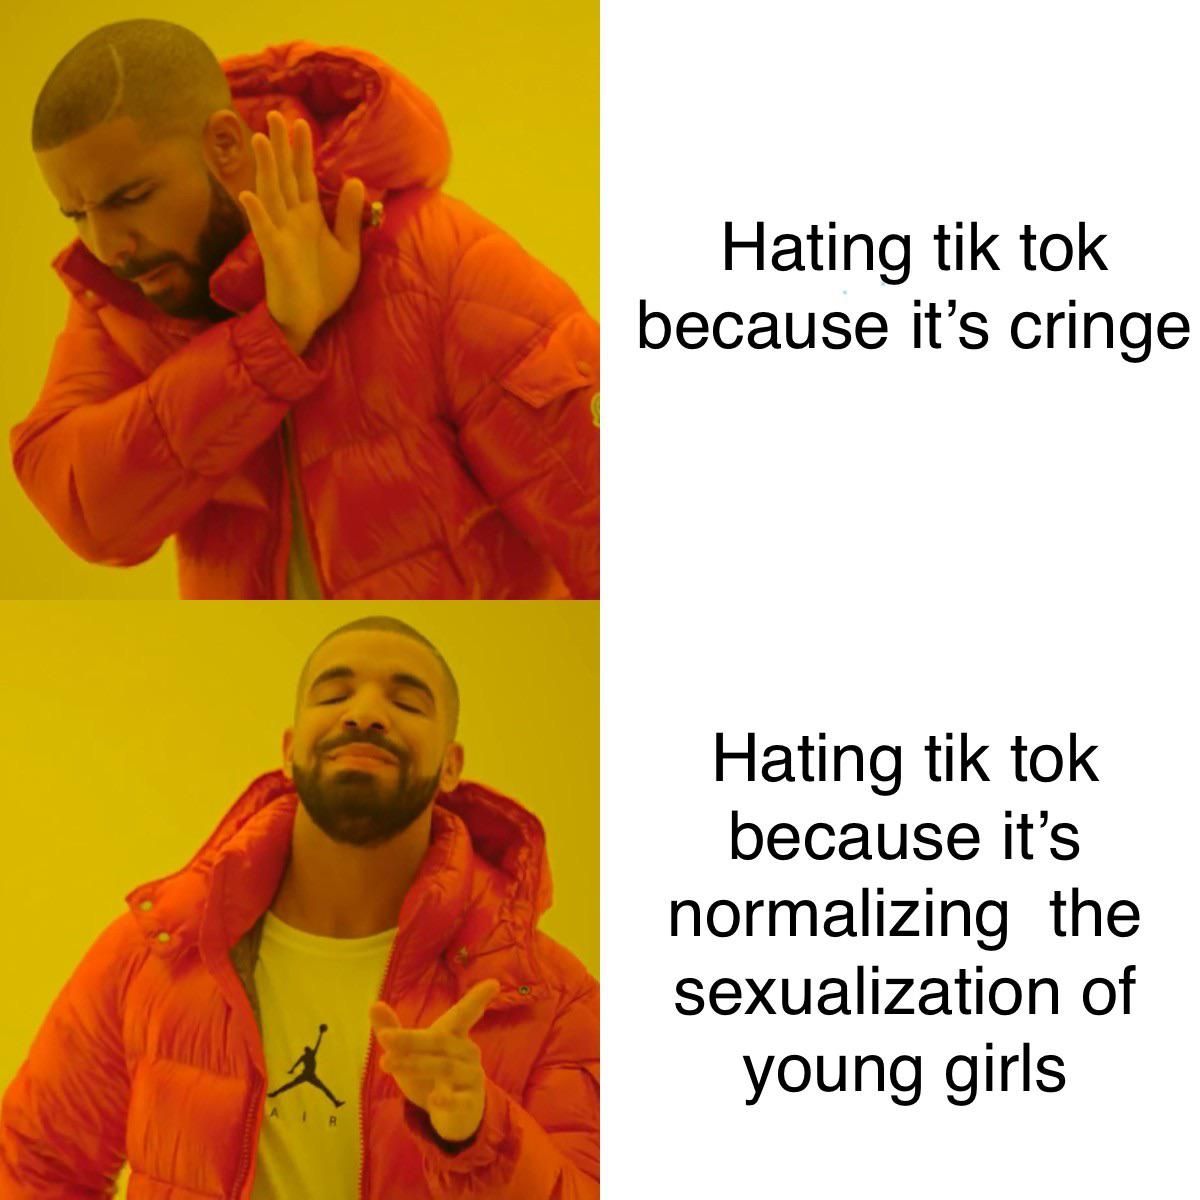 Hating tik tok is still cool, right?